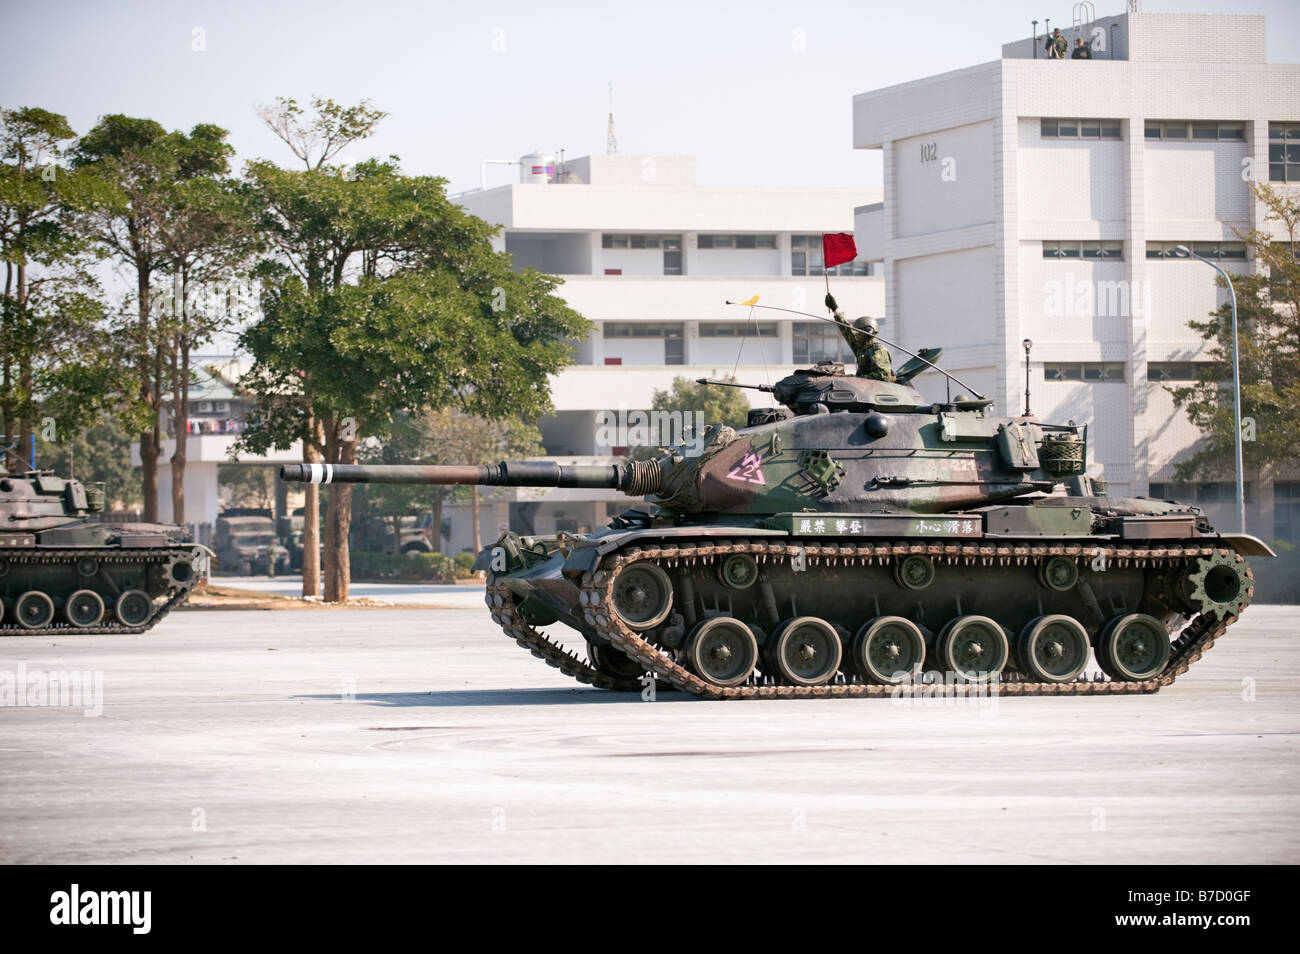 M60A3 Main Battle Tank During Military Exercises At The 58th Artillery Command, Taichung, Taiwan Stock Photo